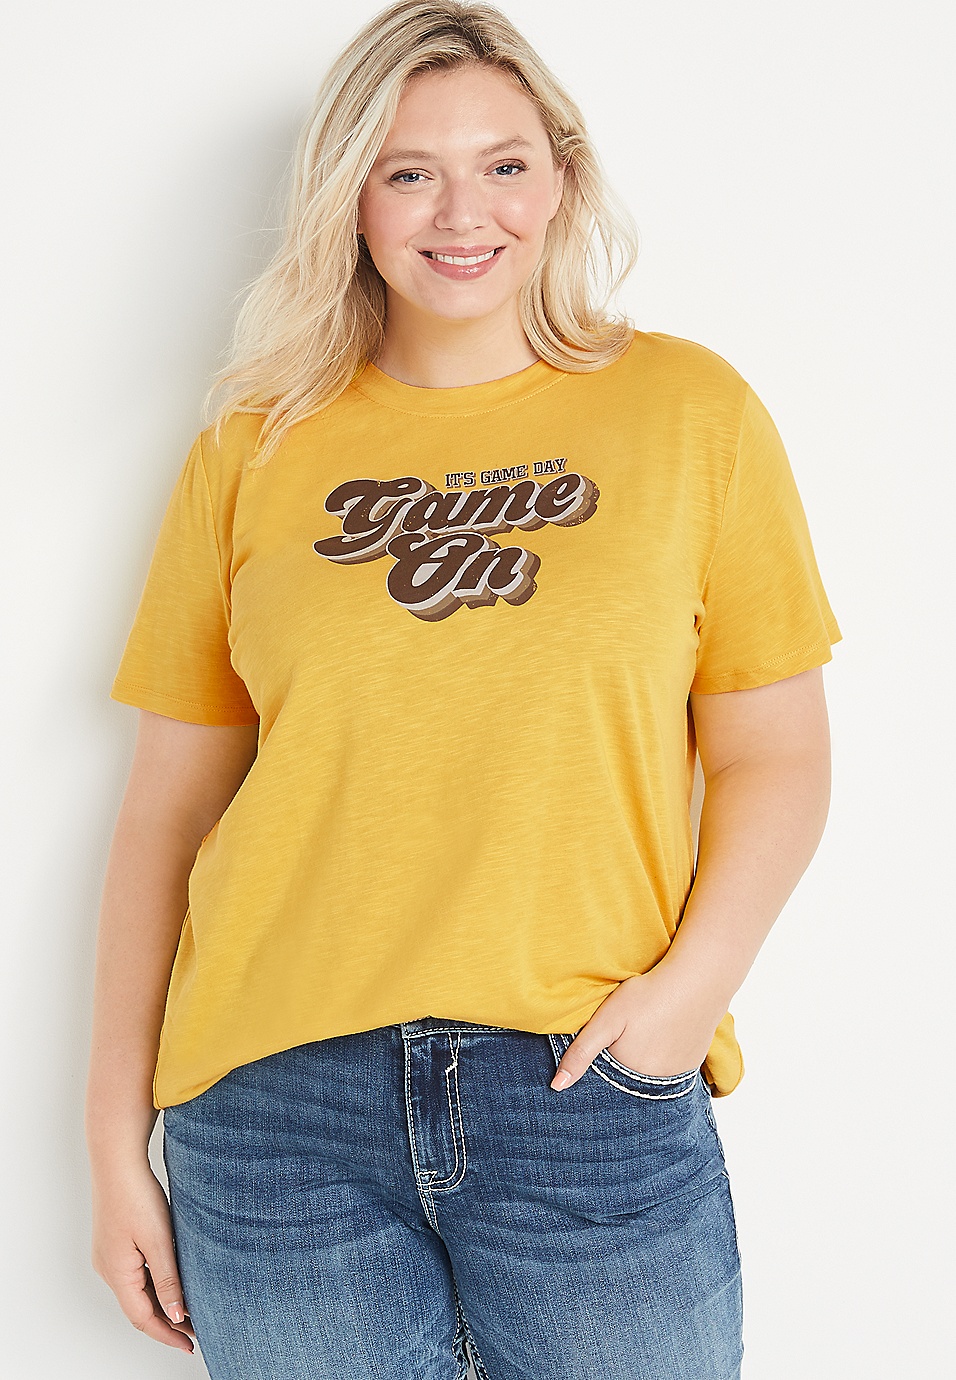 Women's Graphic Tees For Summer 2023 - Brit + Co